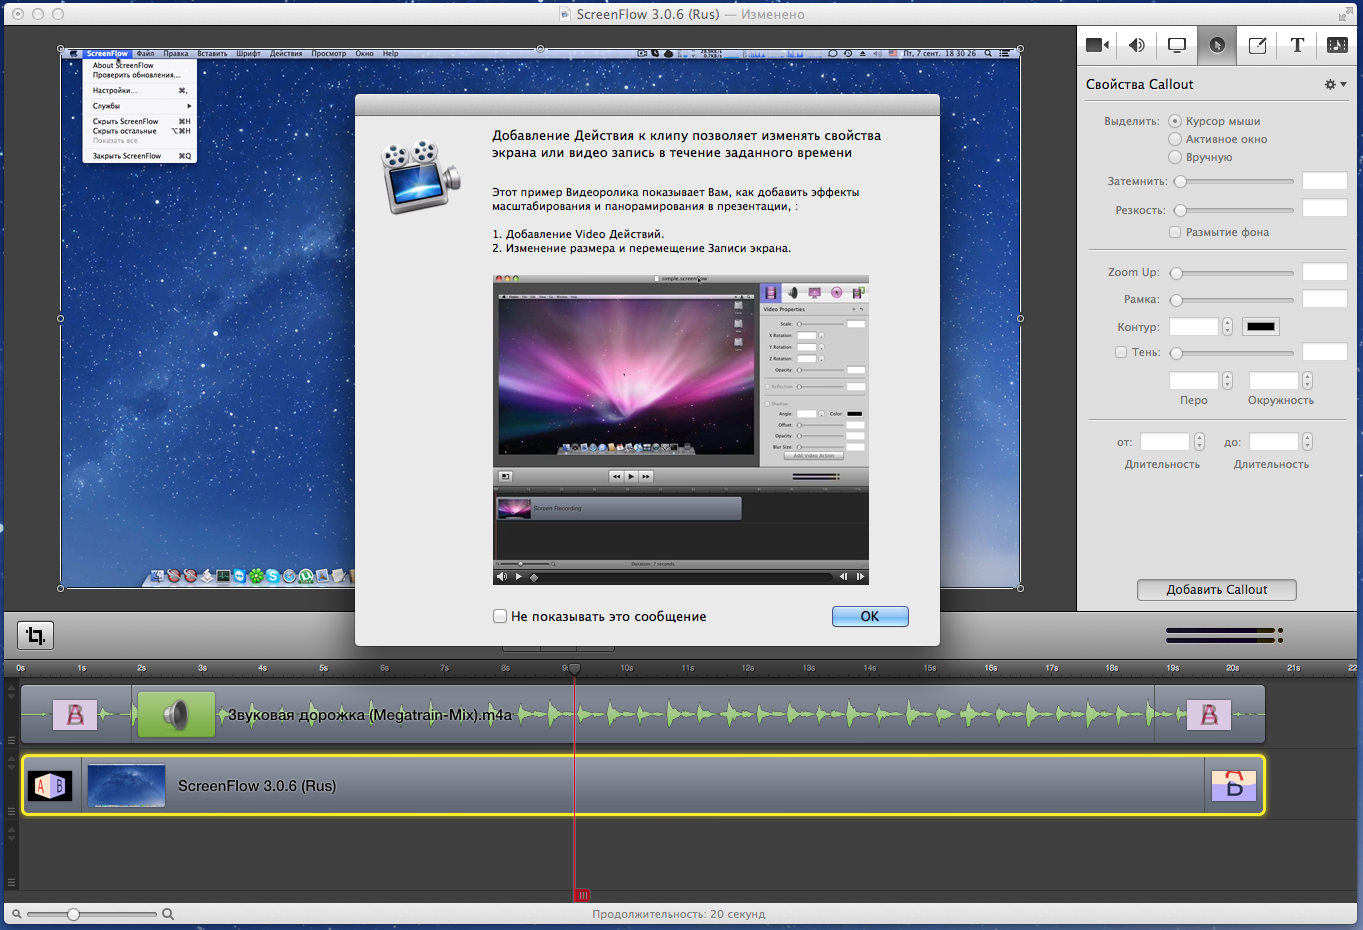 Screen recording, screencasting, and video editing software for Mac